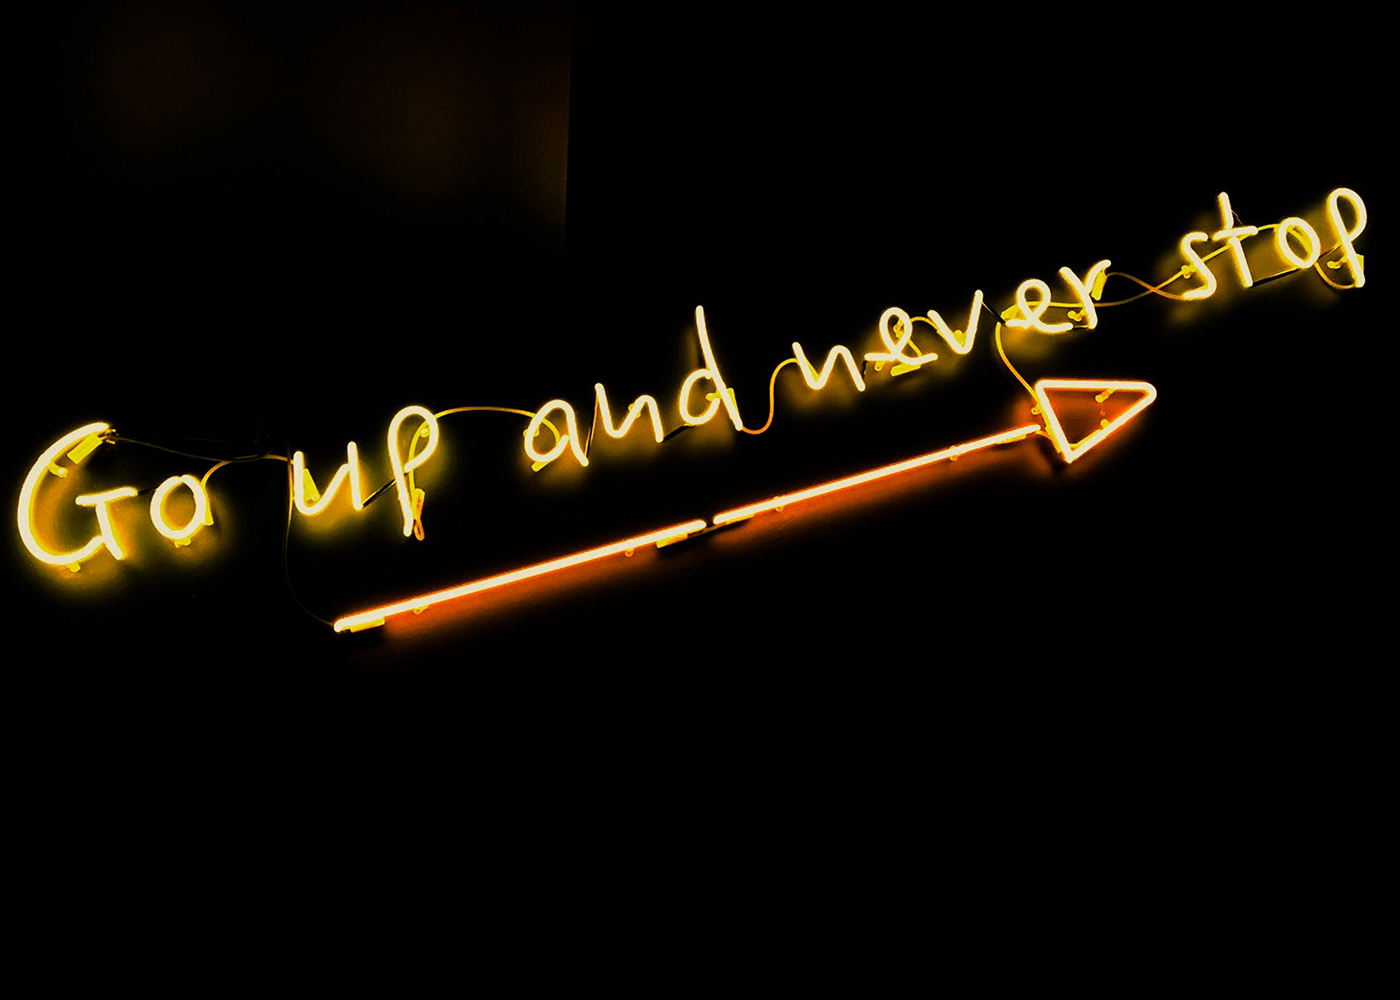 Neon sign Go up and never stop